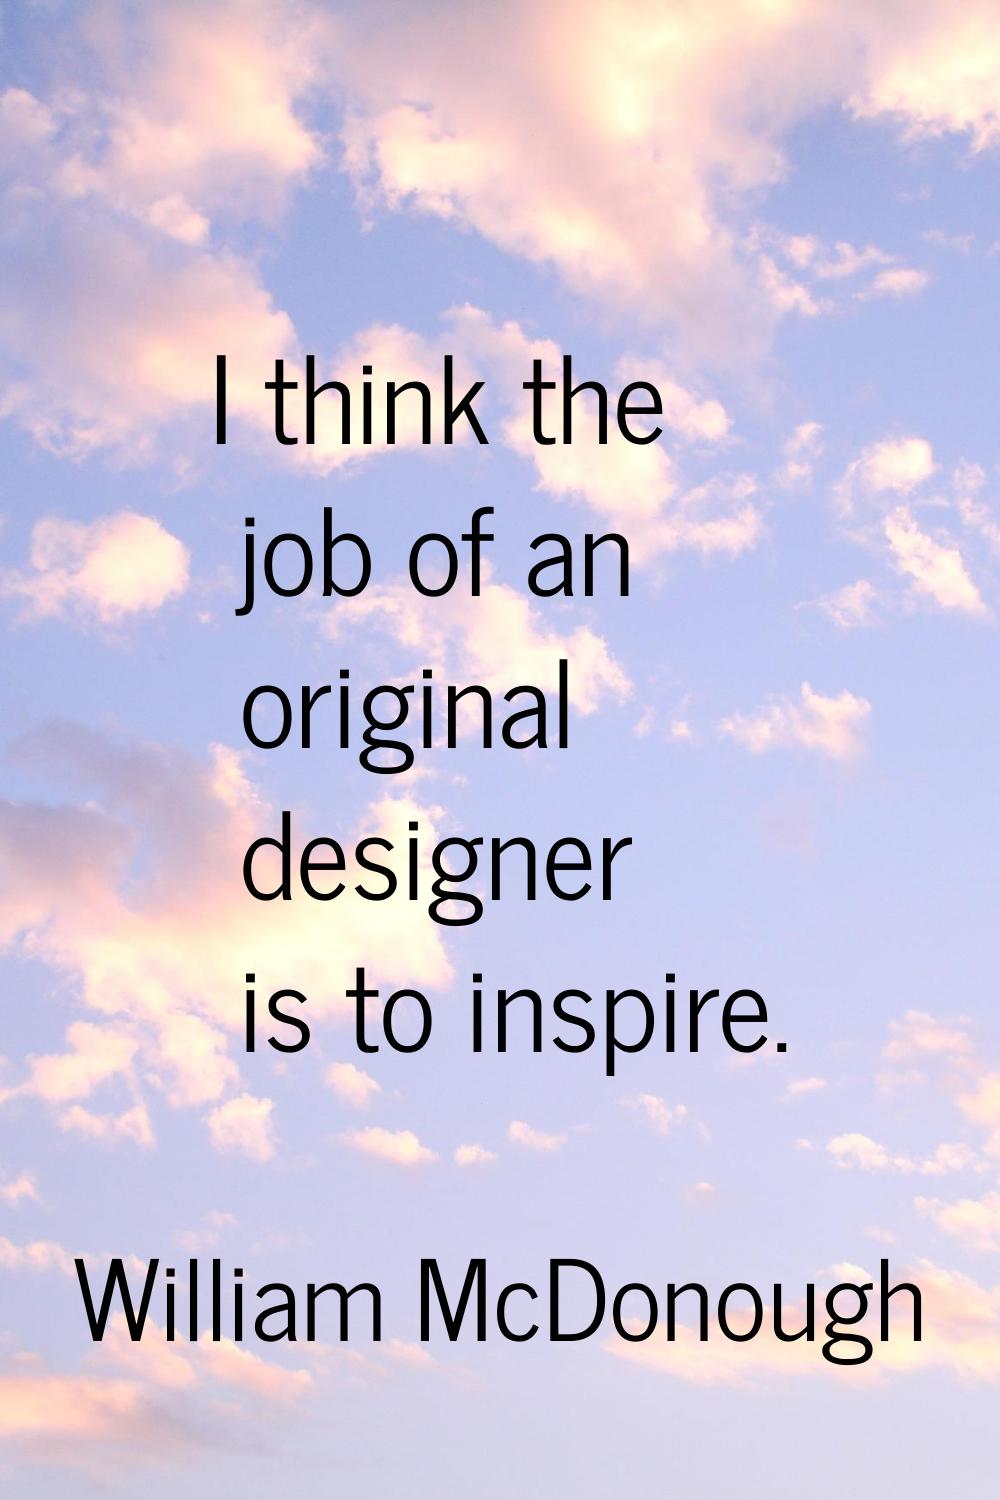 I think the job of an original designer is to inspire.